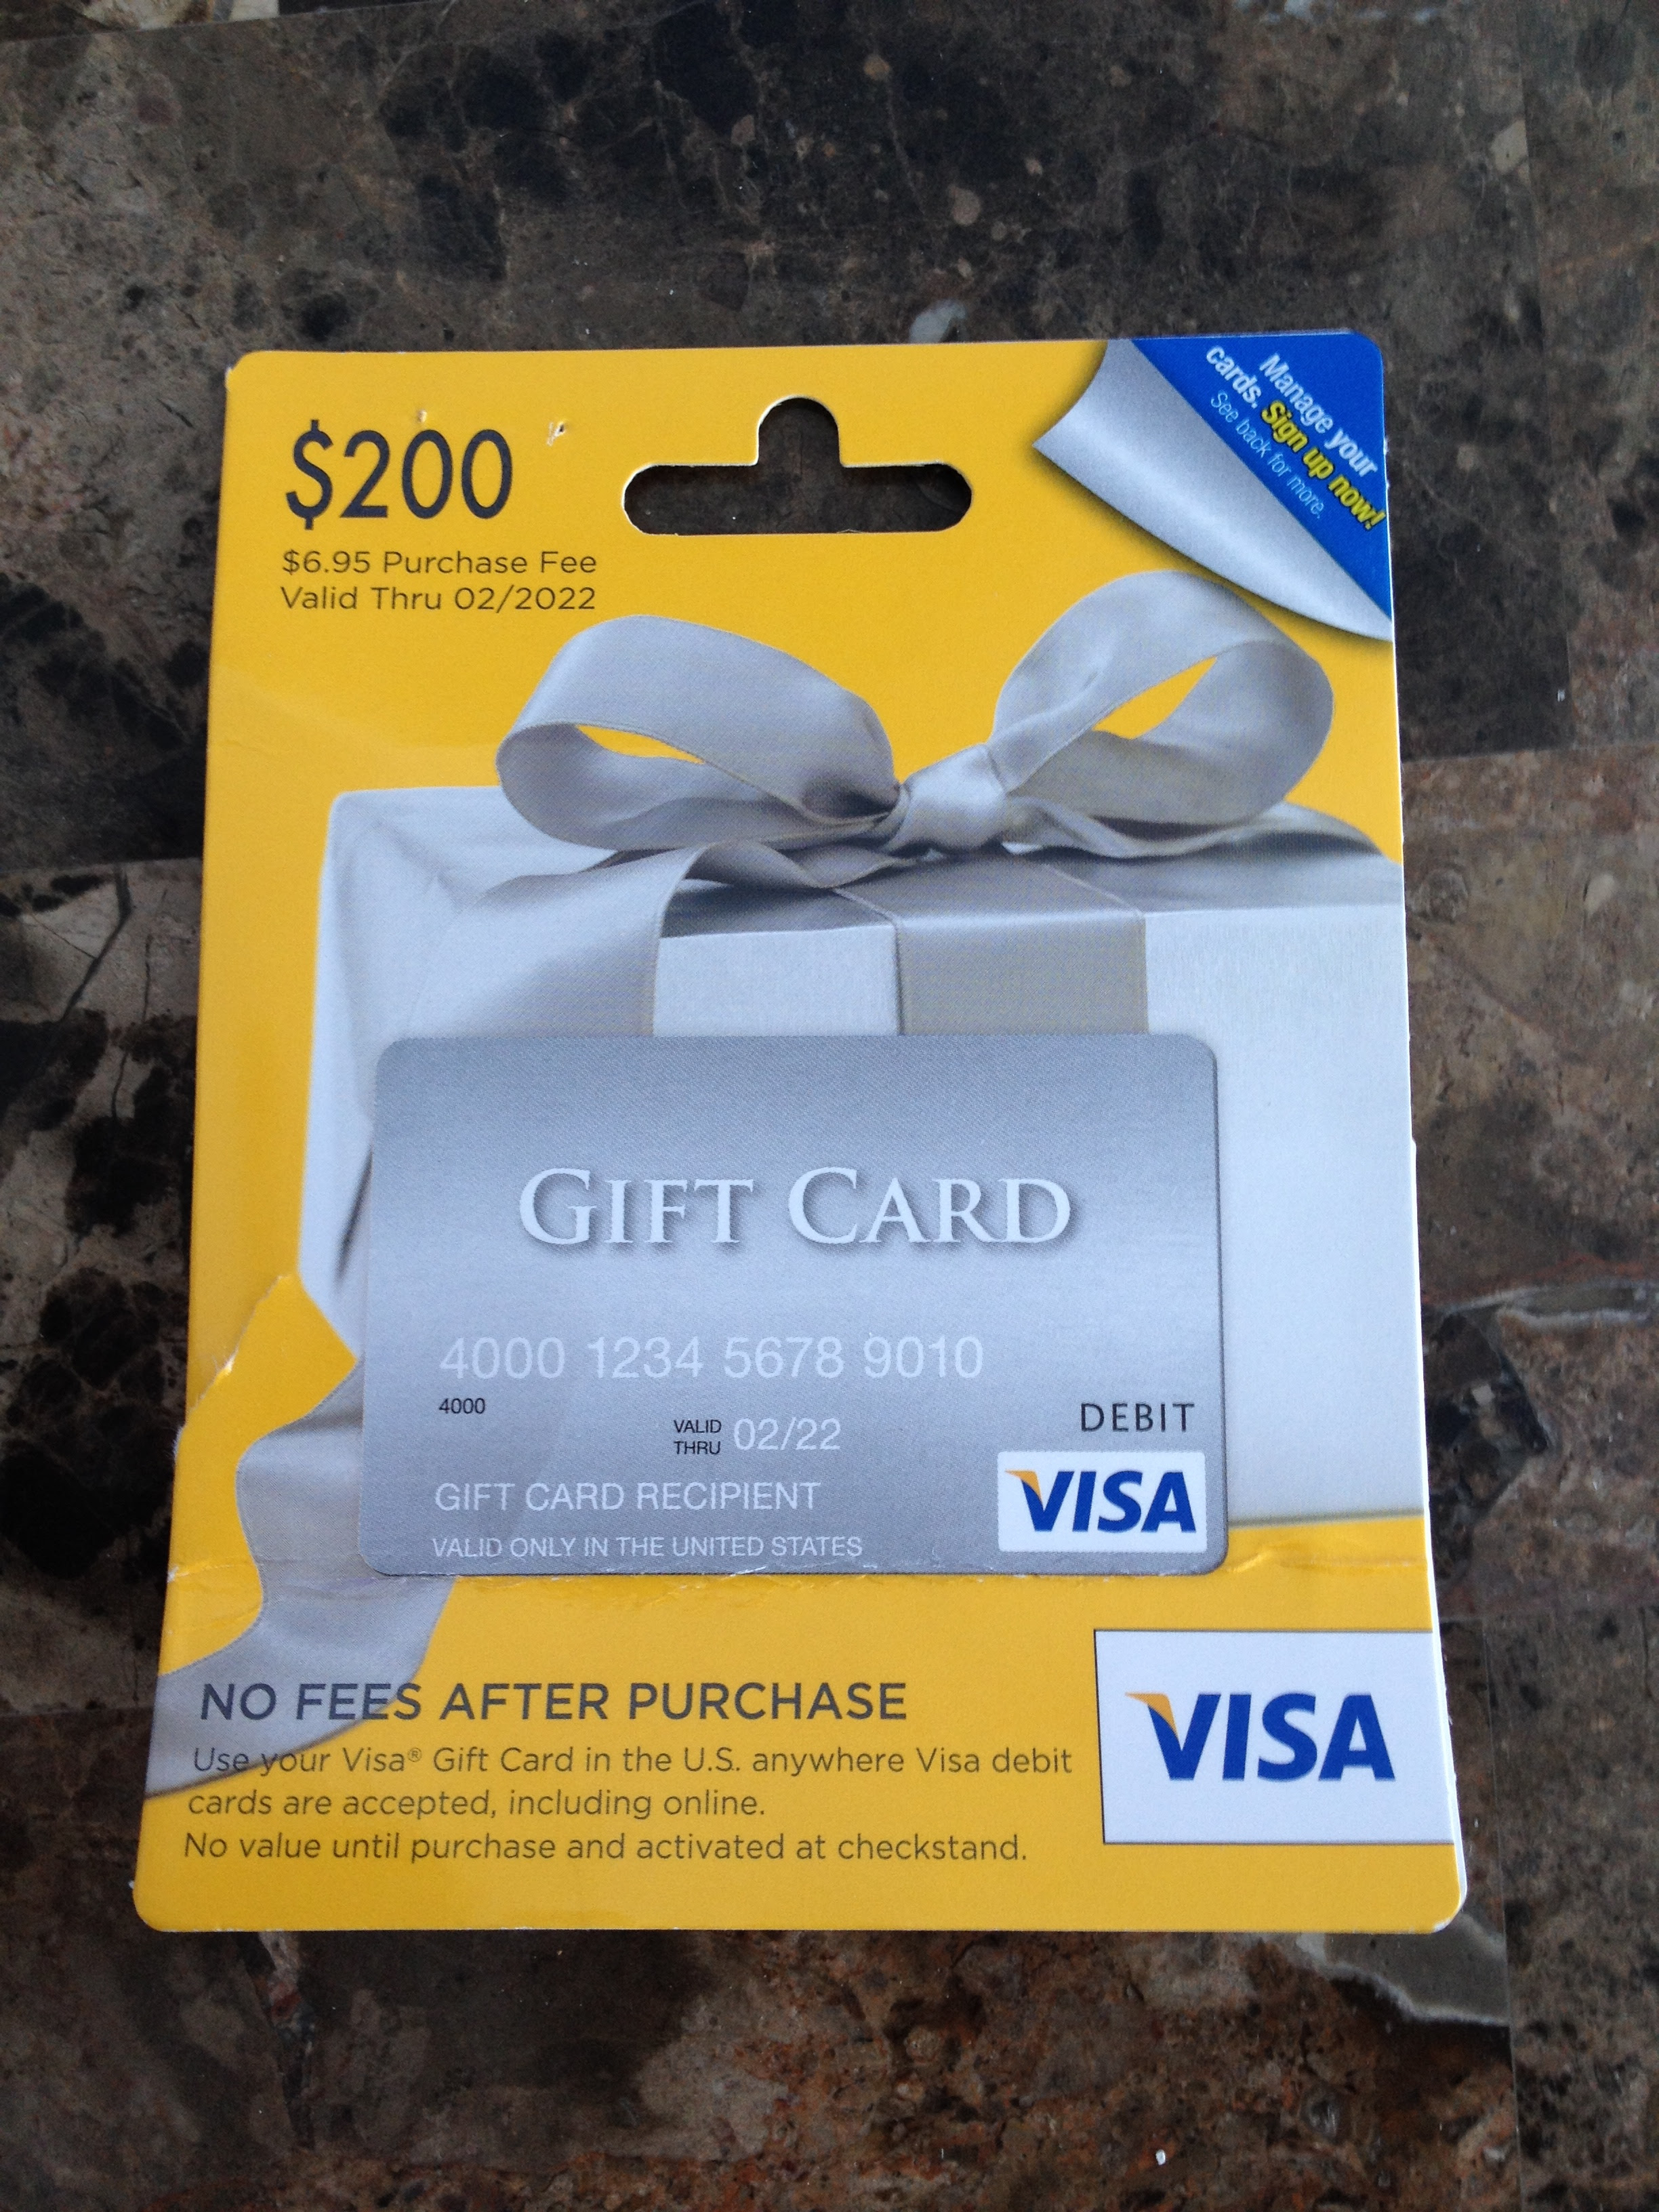 Residents who are over 18 years old only (or 19 in certain states) and for use virtually anywhere american express cards are accepted worldwide, subject to verification. How To Use The Walmart Money Pass Kiosk To Load Gift Cards Onto Your Bluebird For No Fee